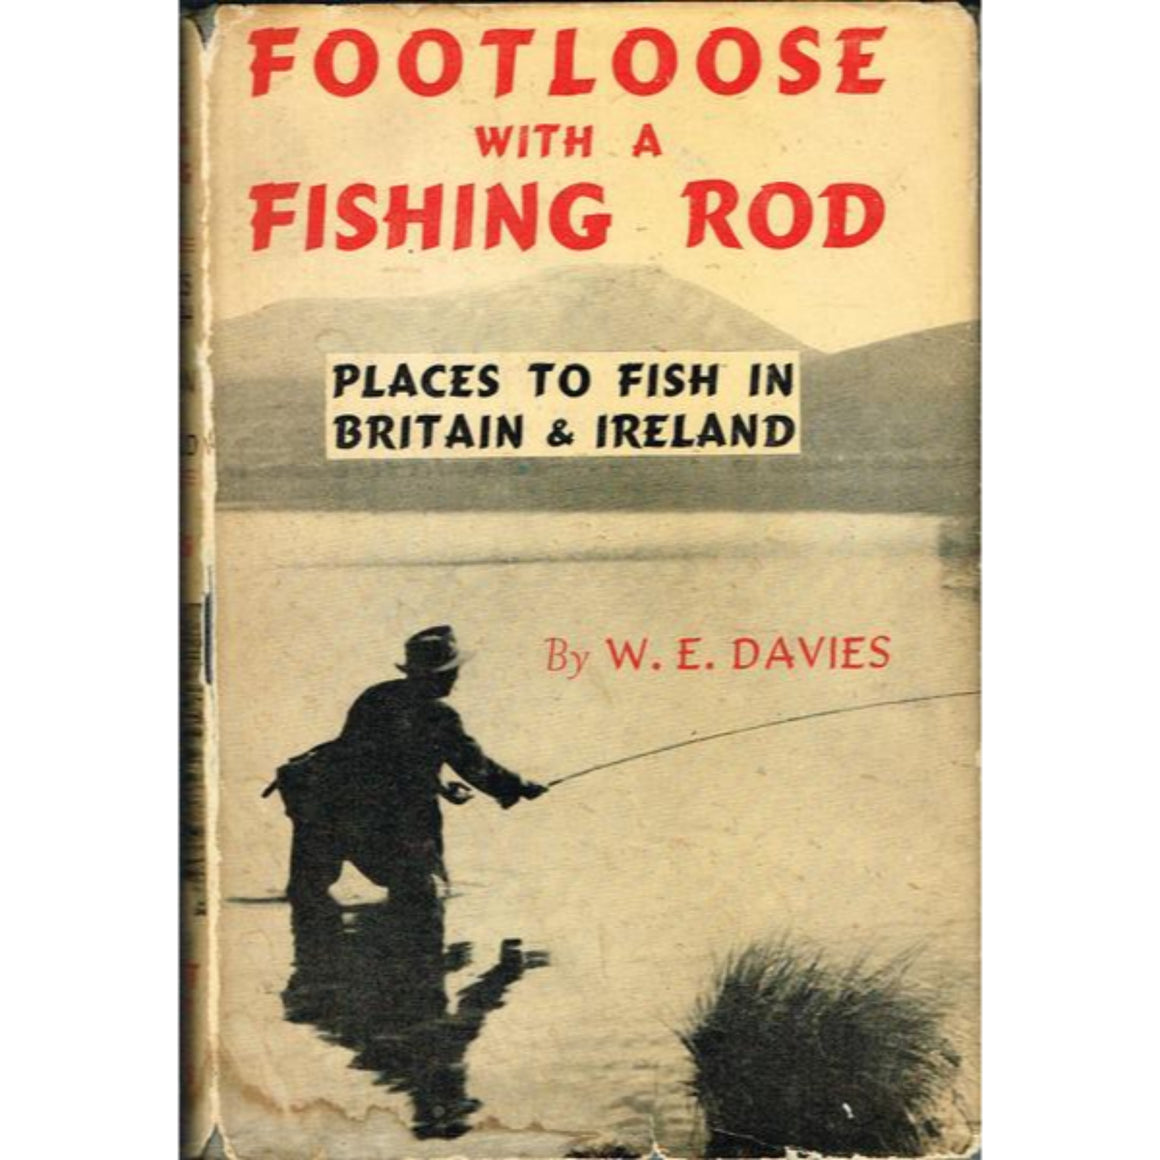 "Footloose With A Fishing Rod: Places To Fish In Britain And Ireland"